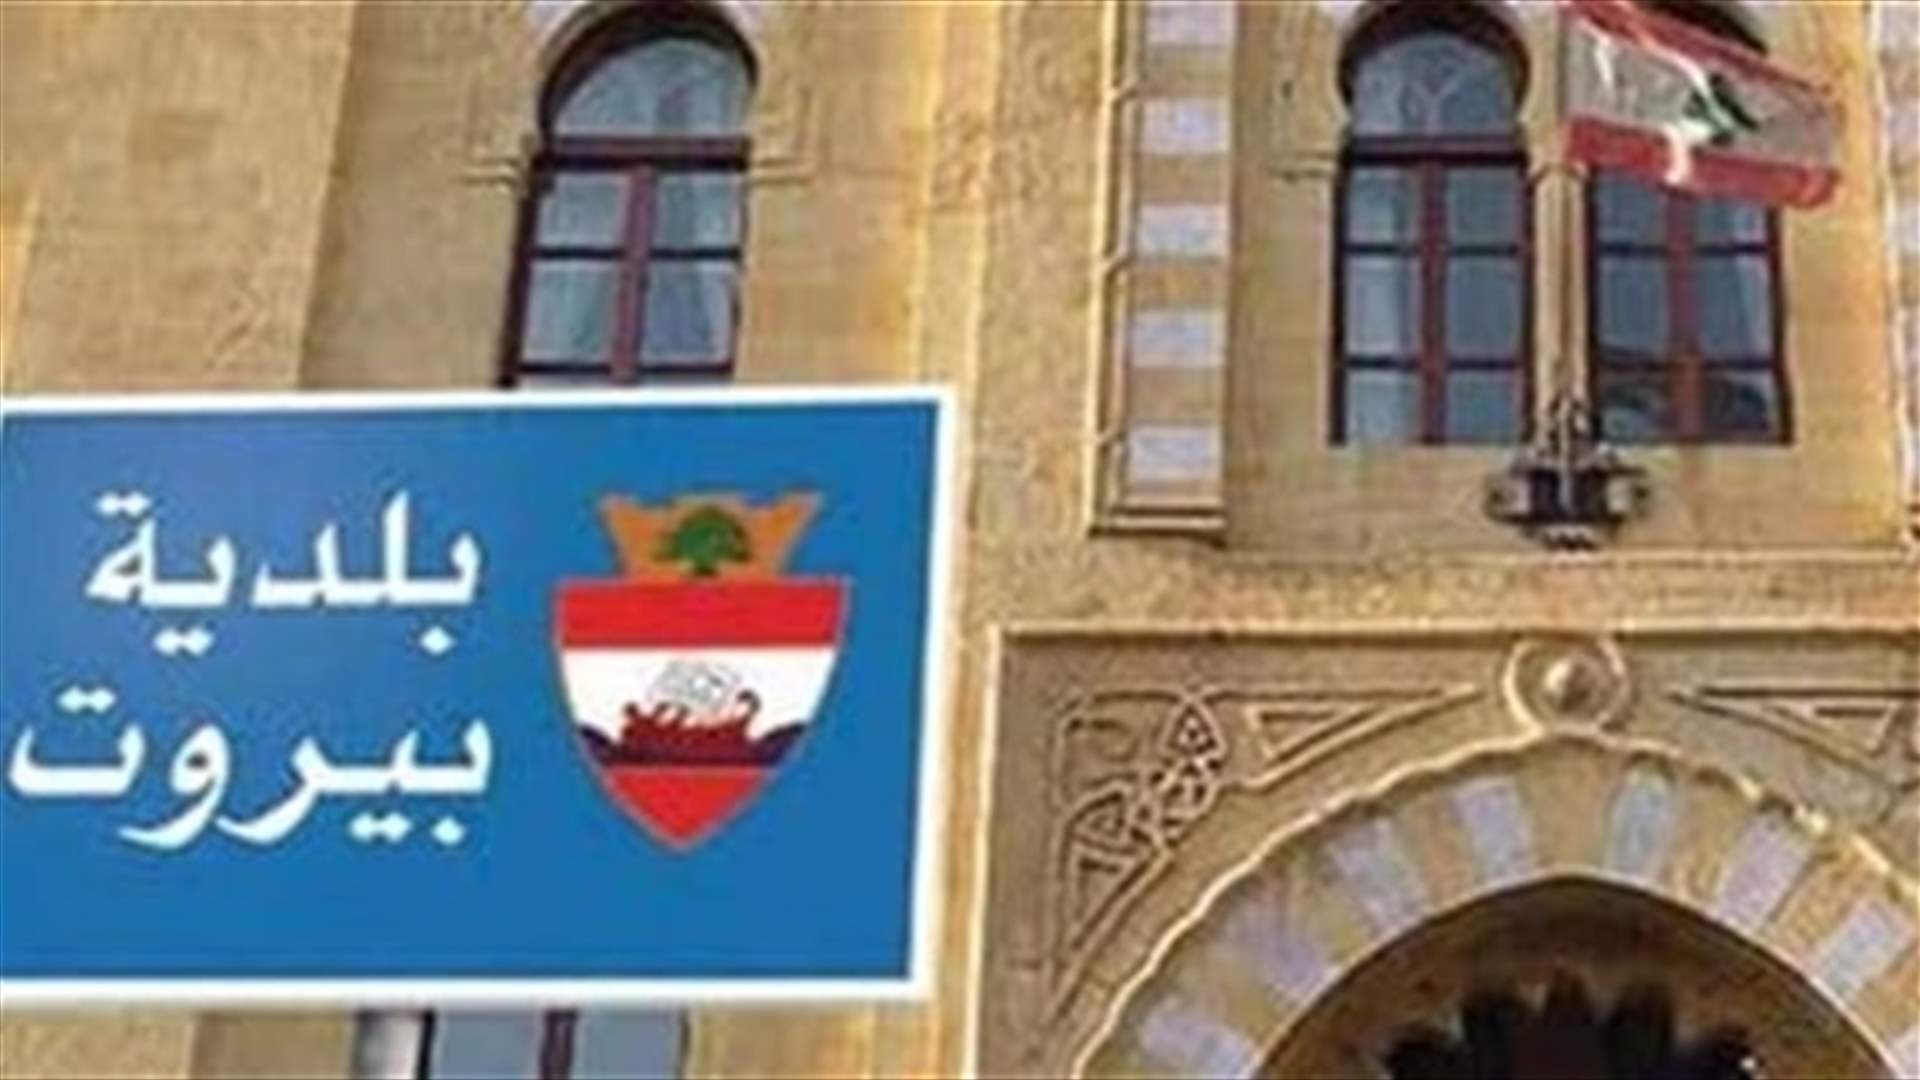 Beirut municipality to start removing all elections related slogans, banners